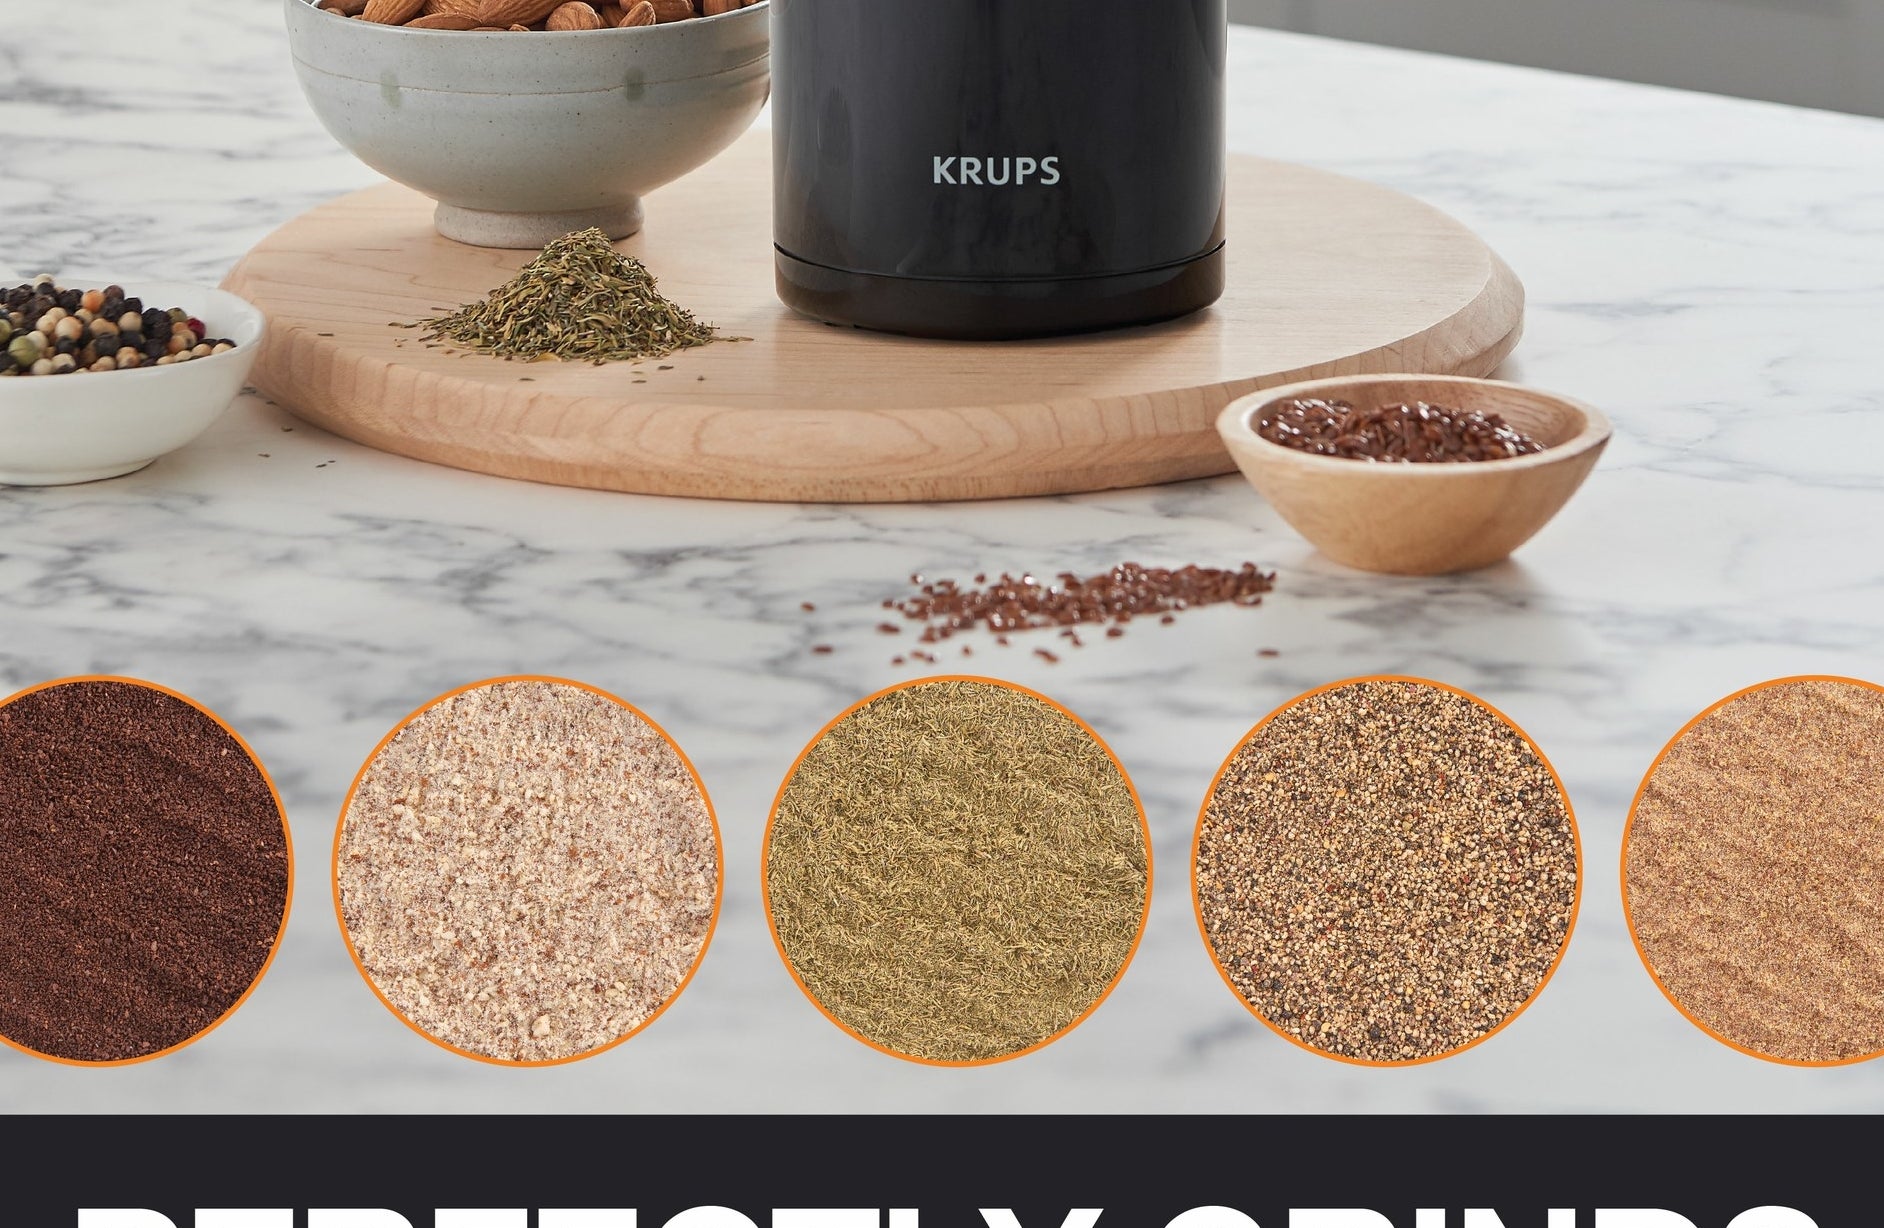 The grinder with nuts, herbs and spices